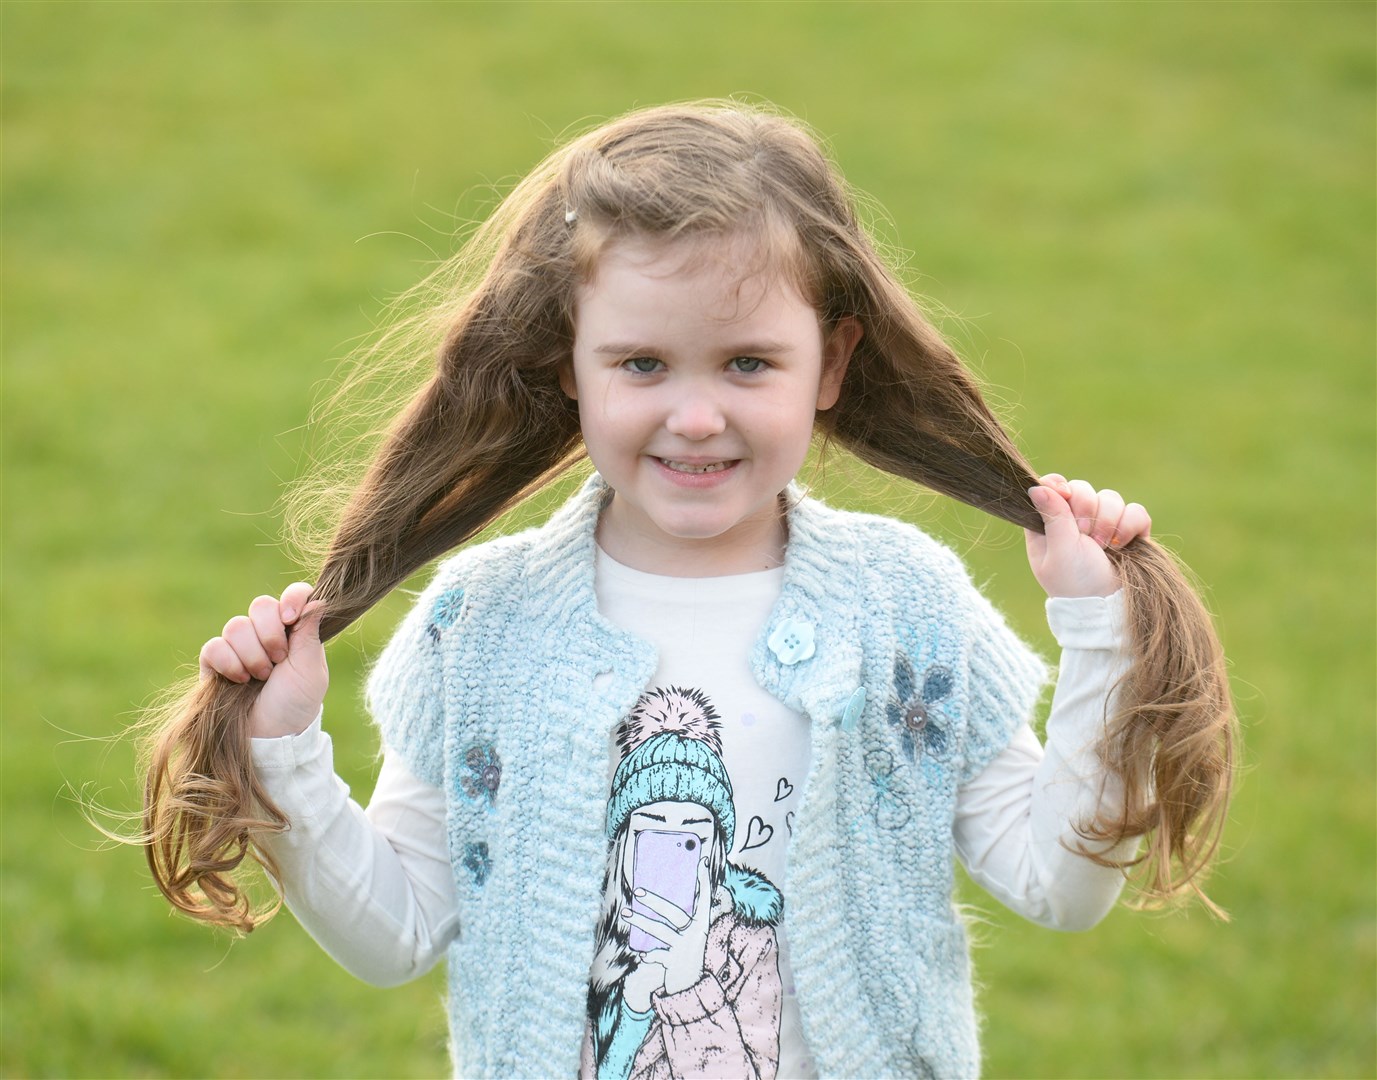 Little Freya Bertram (4) from Invergordon will get her hair cut for charity. Picture: Gary Anthony